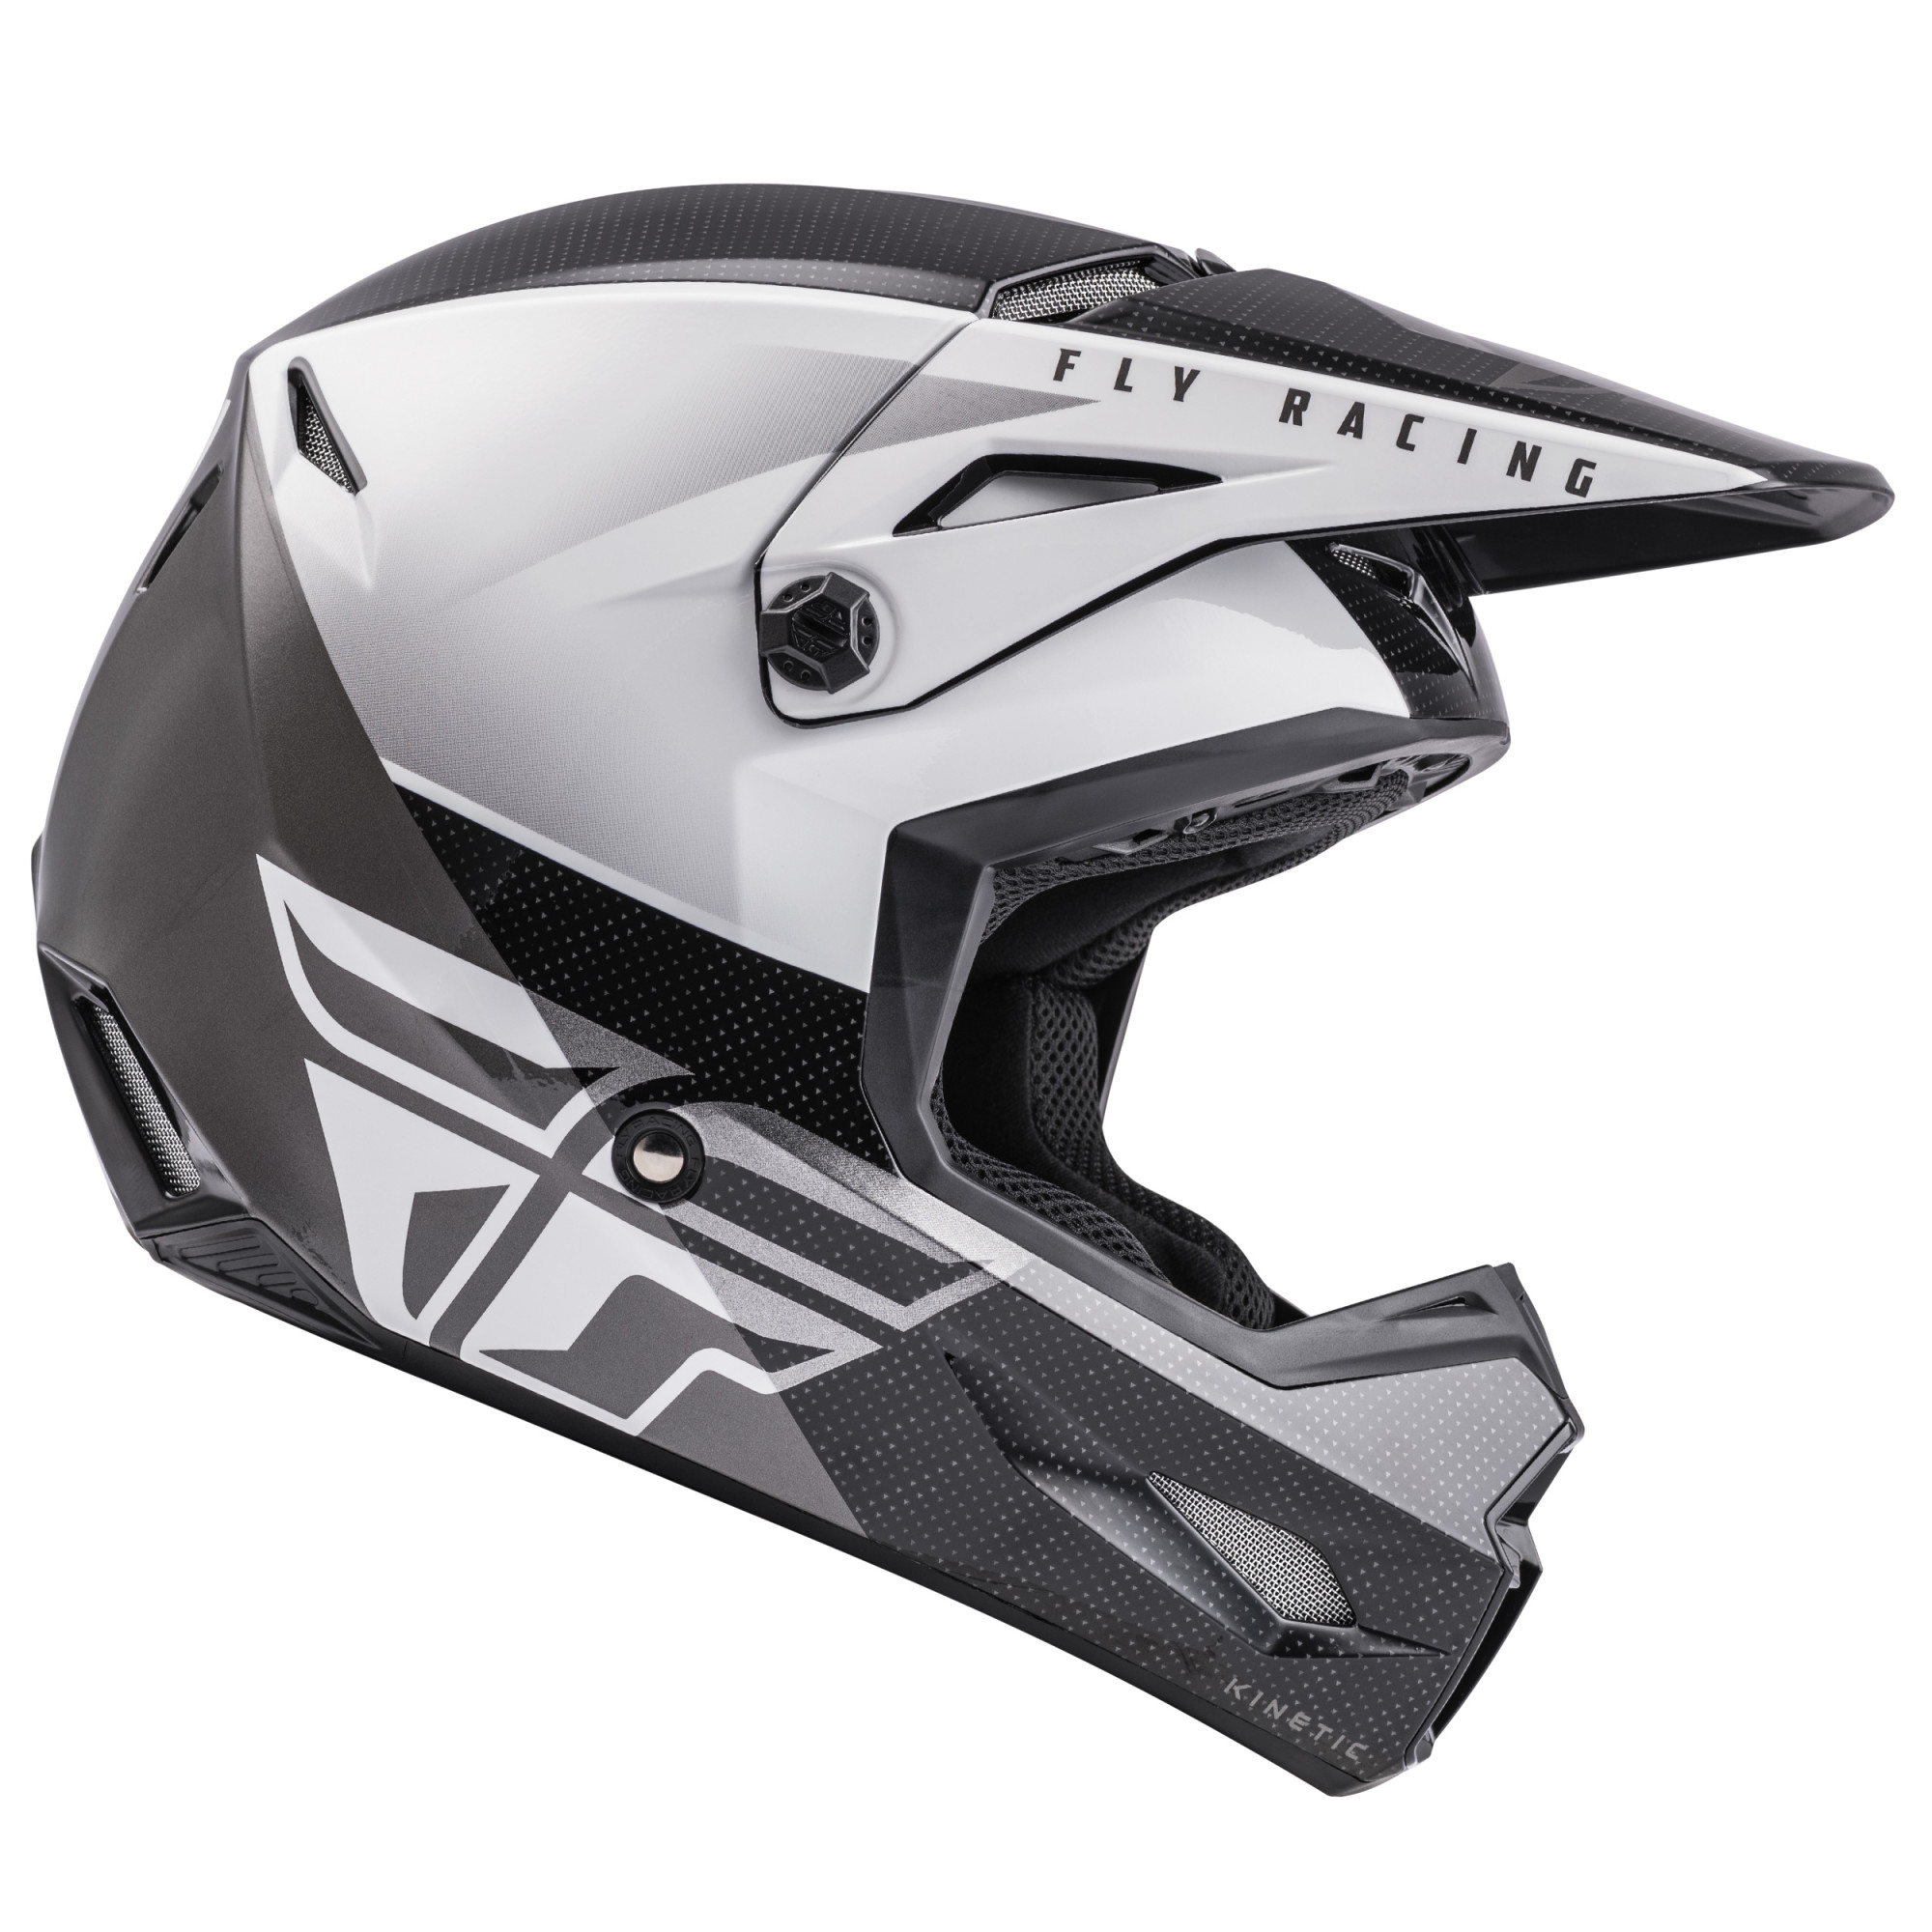 motocross casques par fly racing adult kinetic straight edge